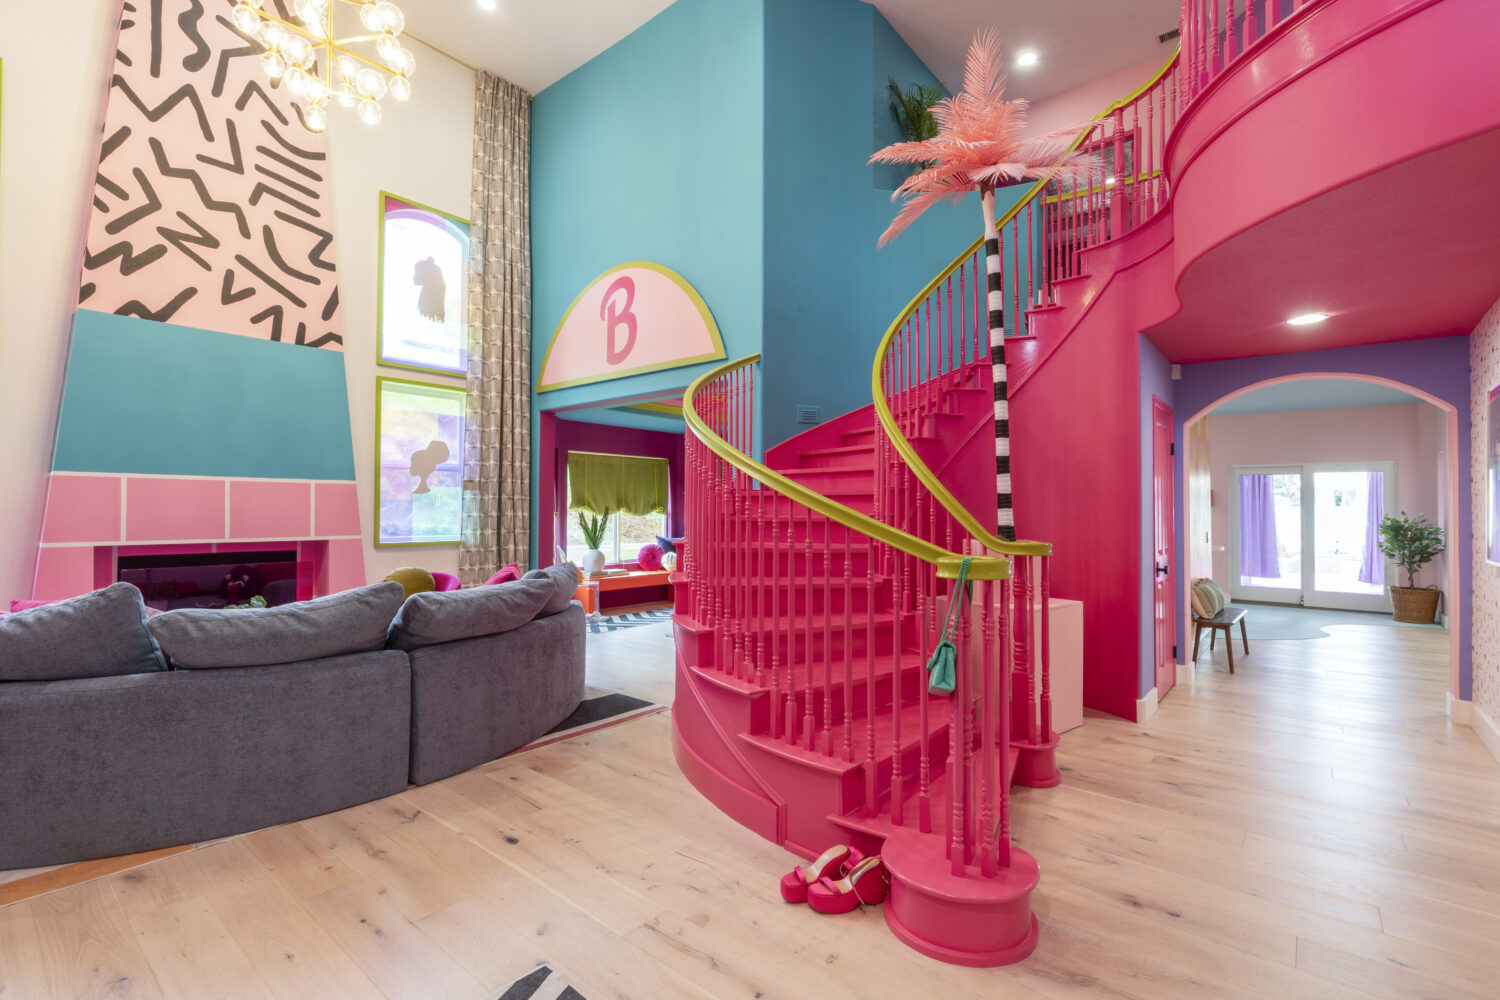 Before-and-After Photos of HGTV's Barbie Dreamhouse